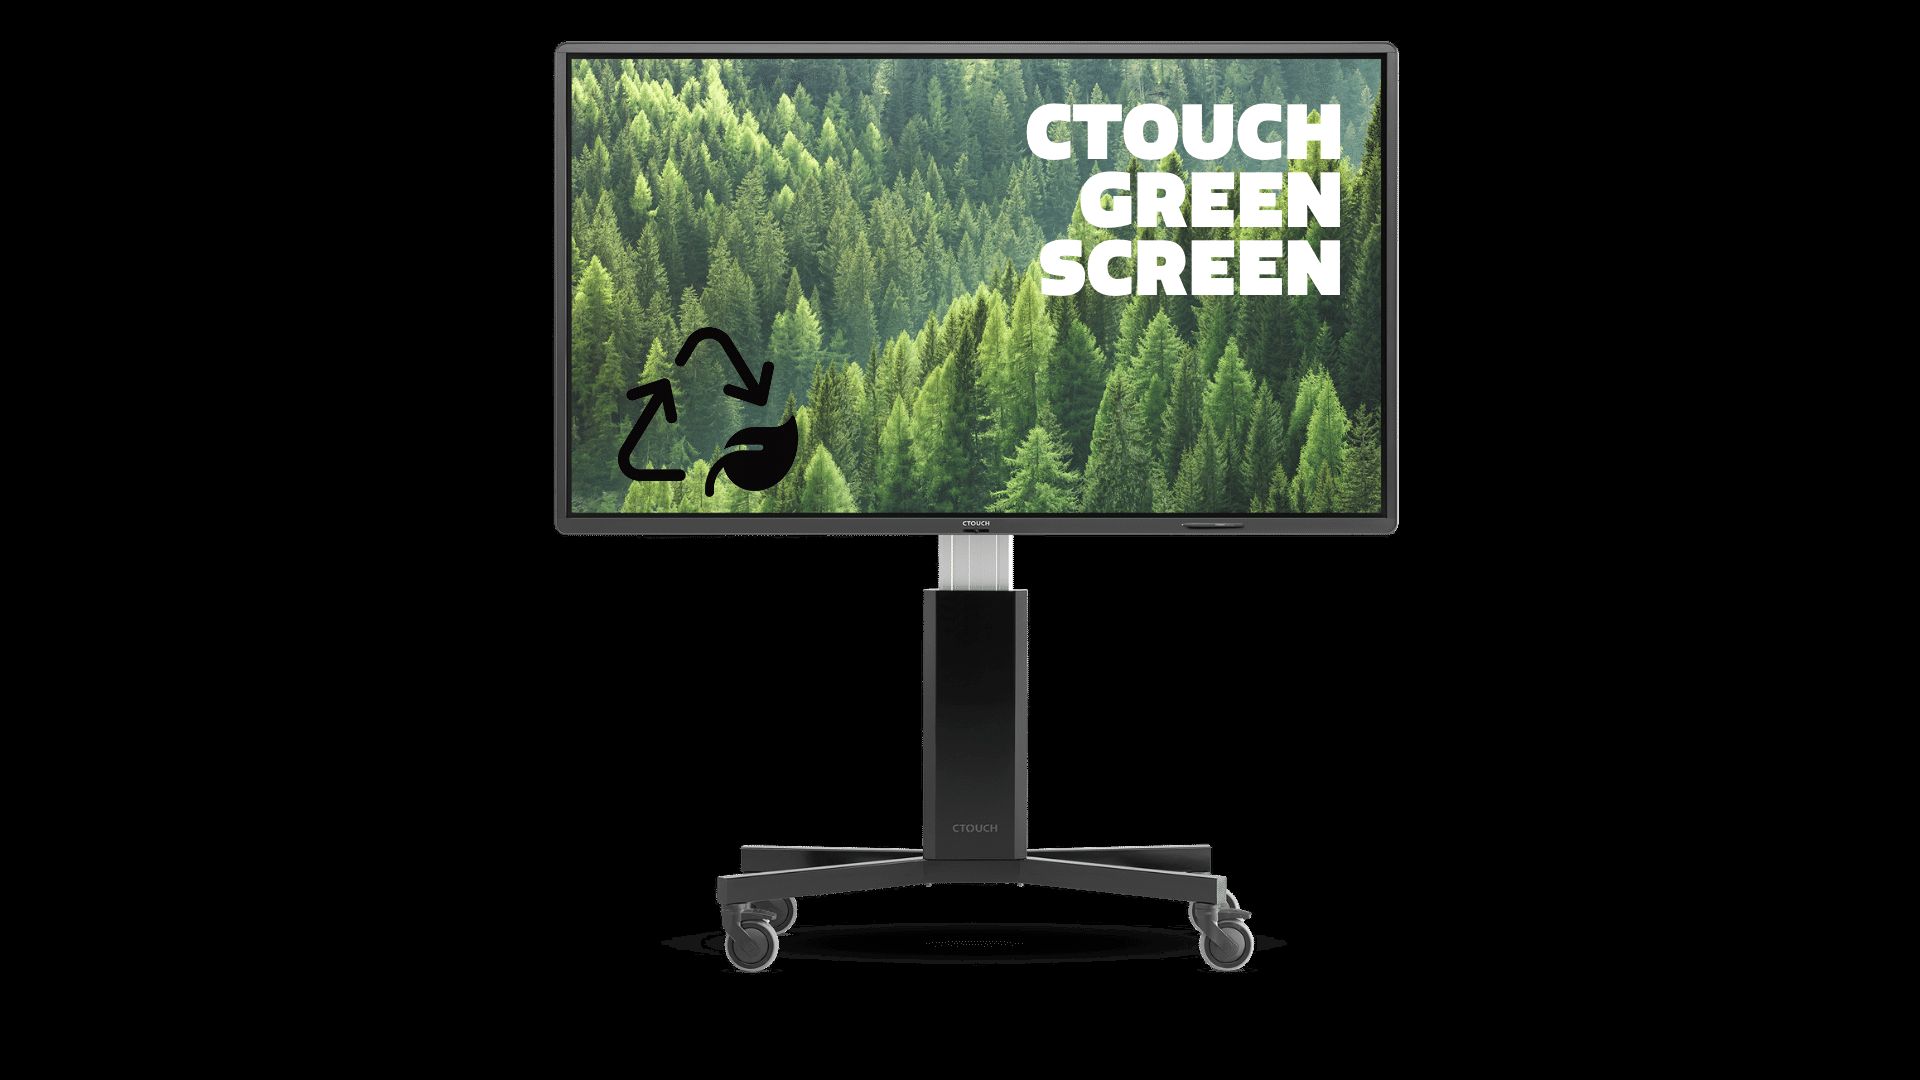 CTOUCH GREEN SCREEN 1920 x 1080 px